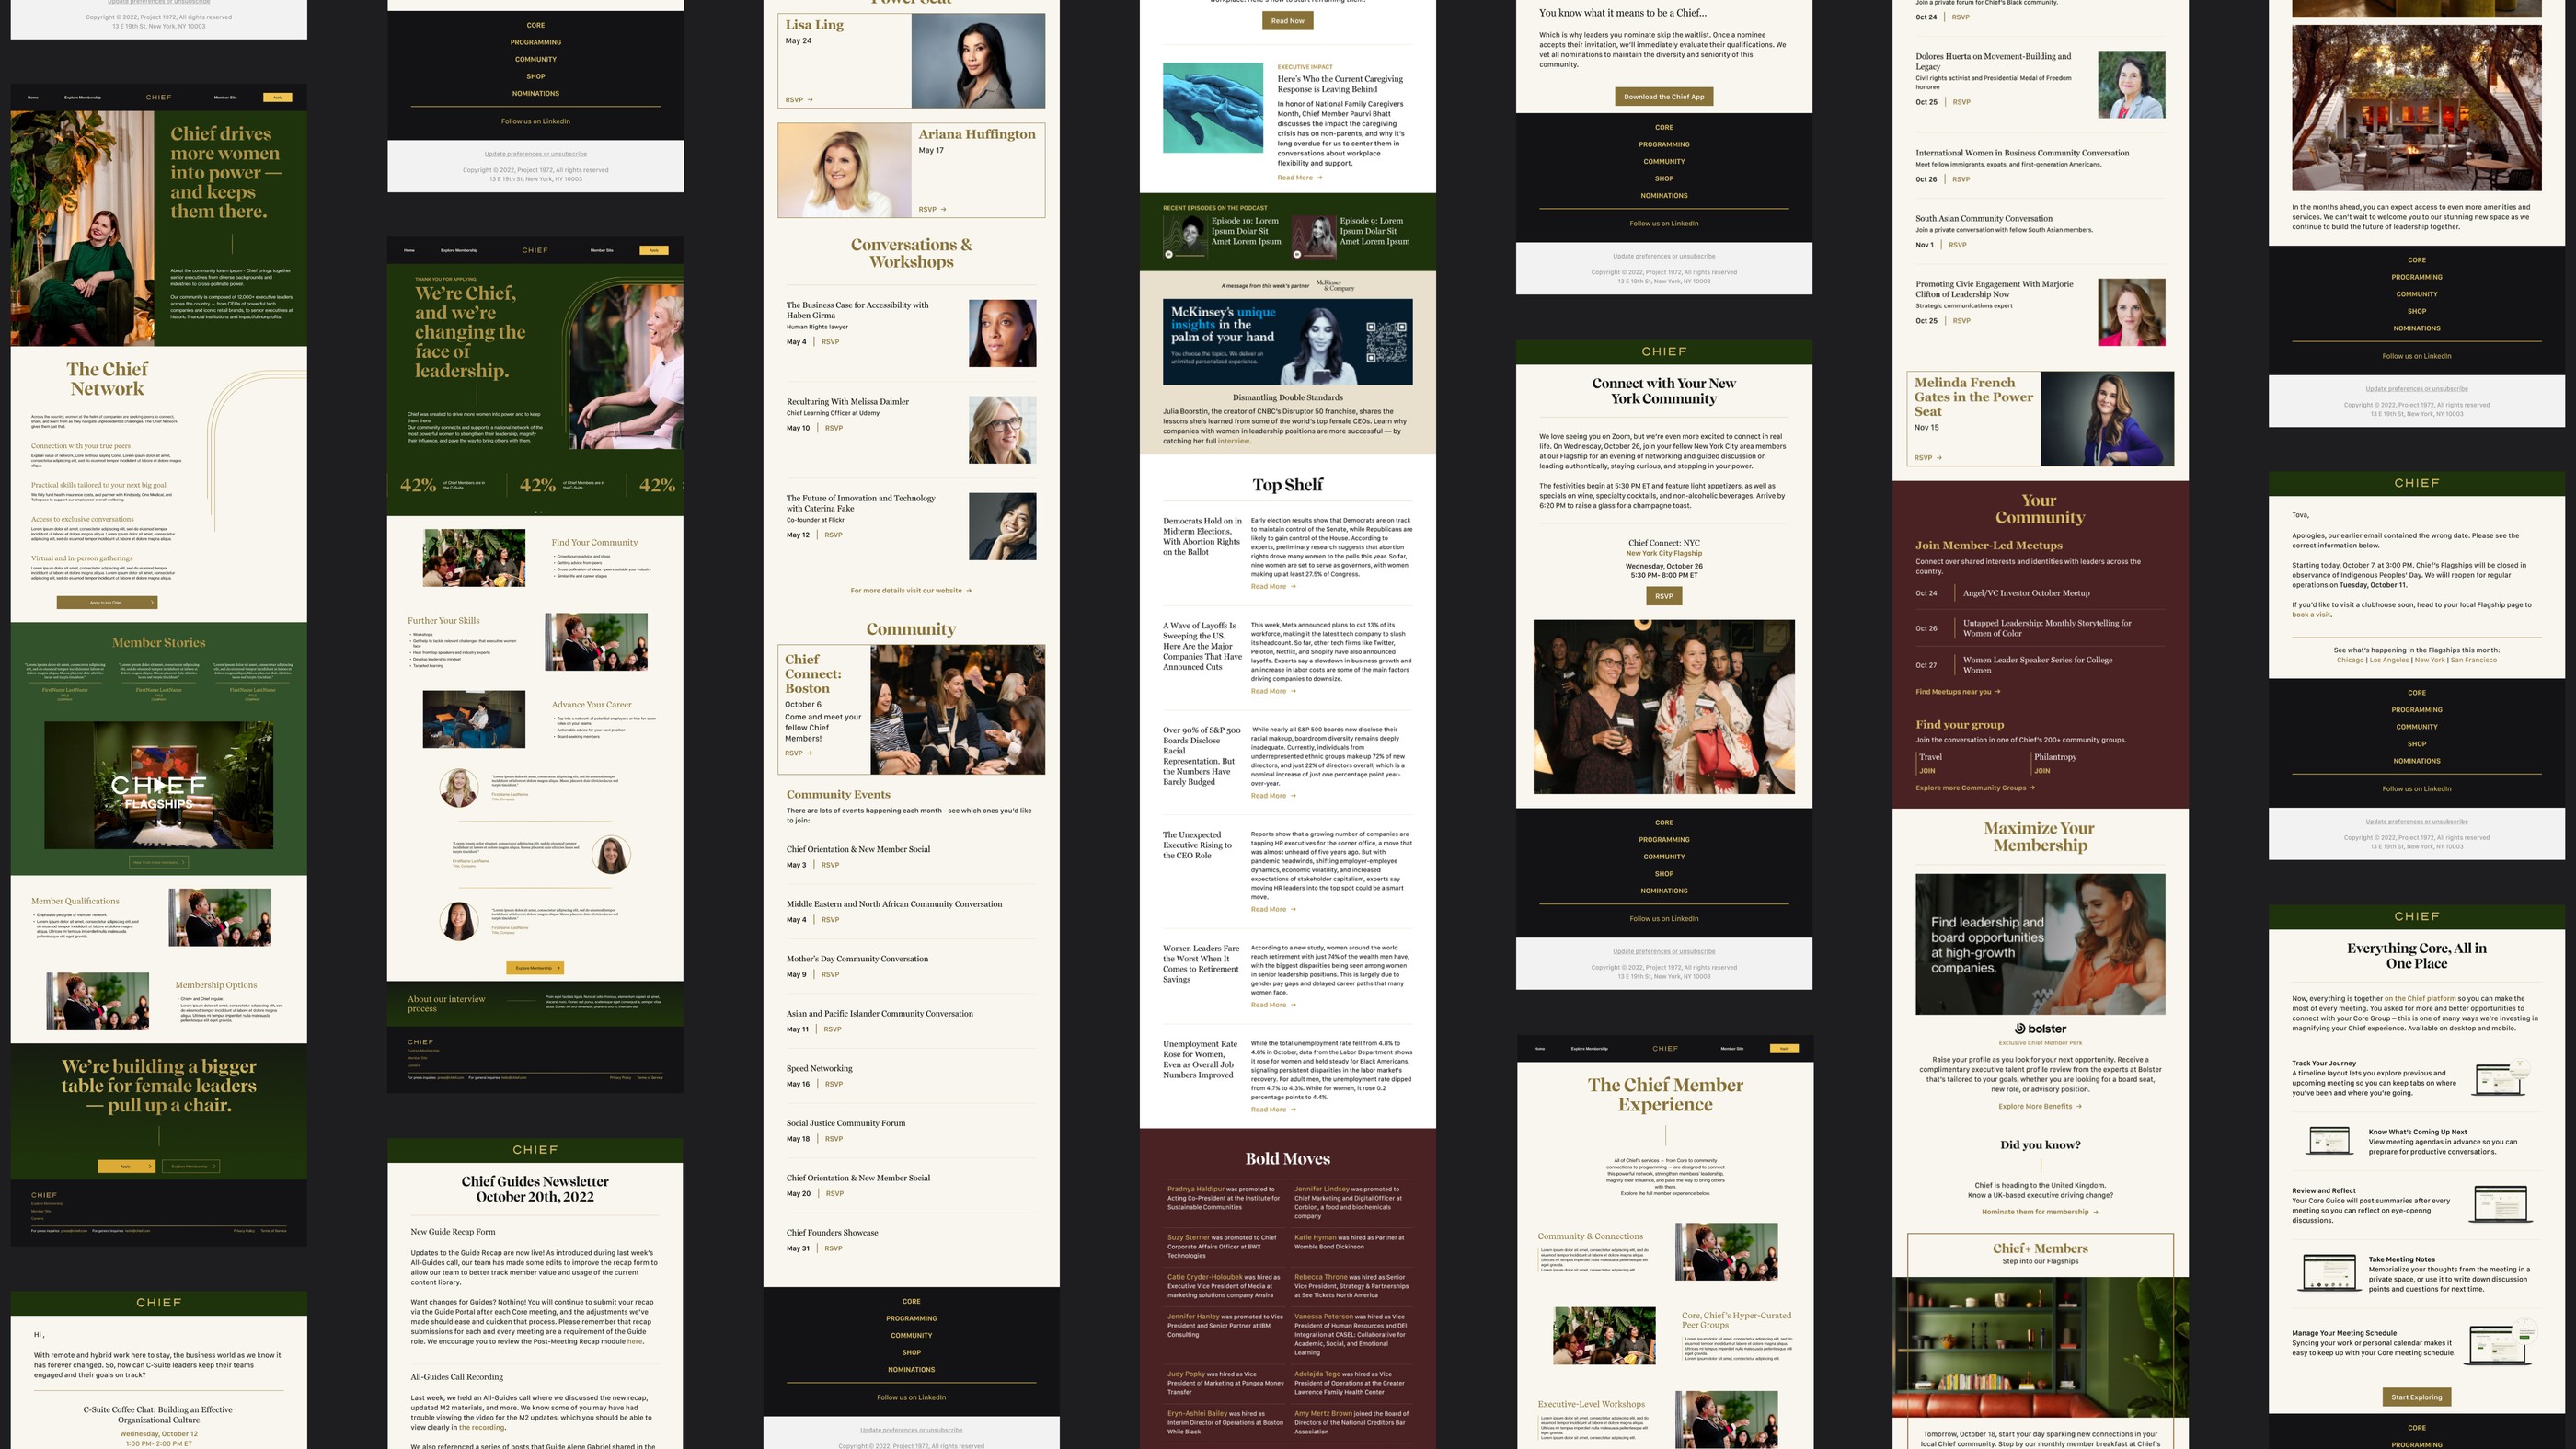 Several layout of emails and landing pages built with the system.